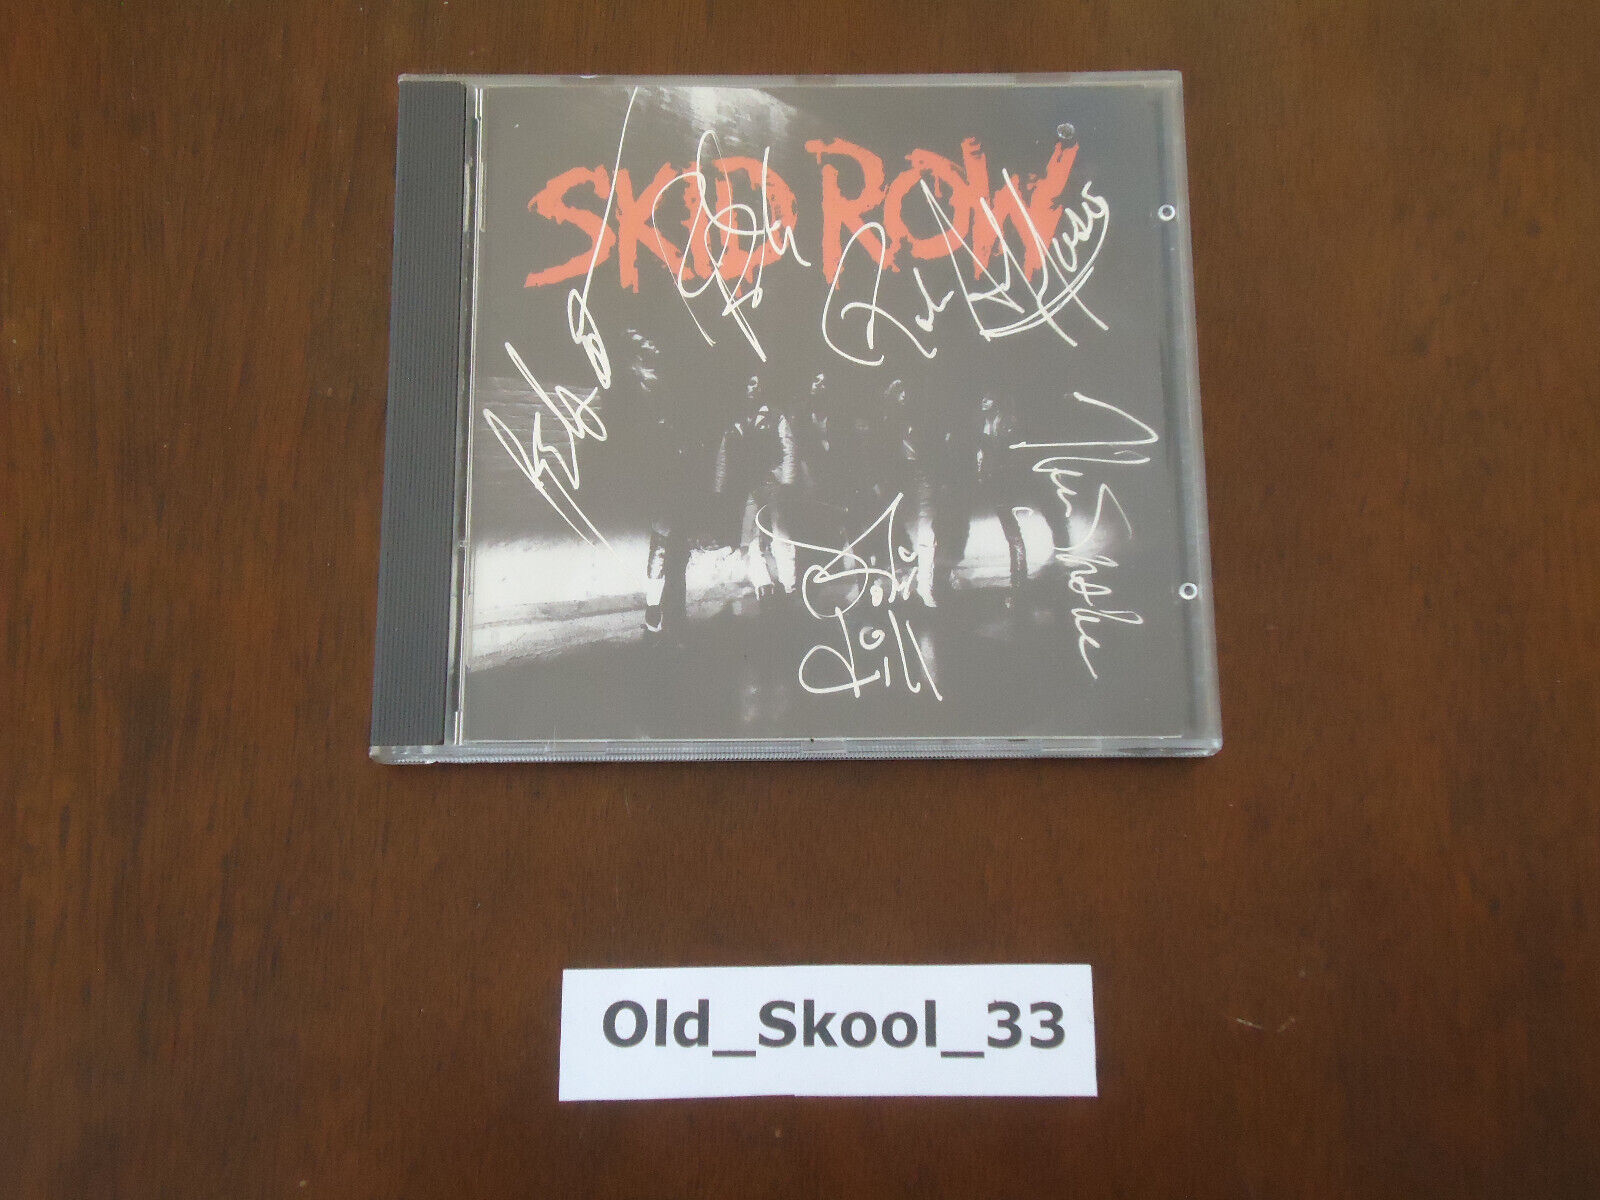 Skid Row autographed debut CD - SIGNED BY ALL 5 BAND MEMBERS - March 24, 1990